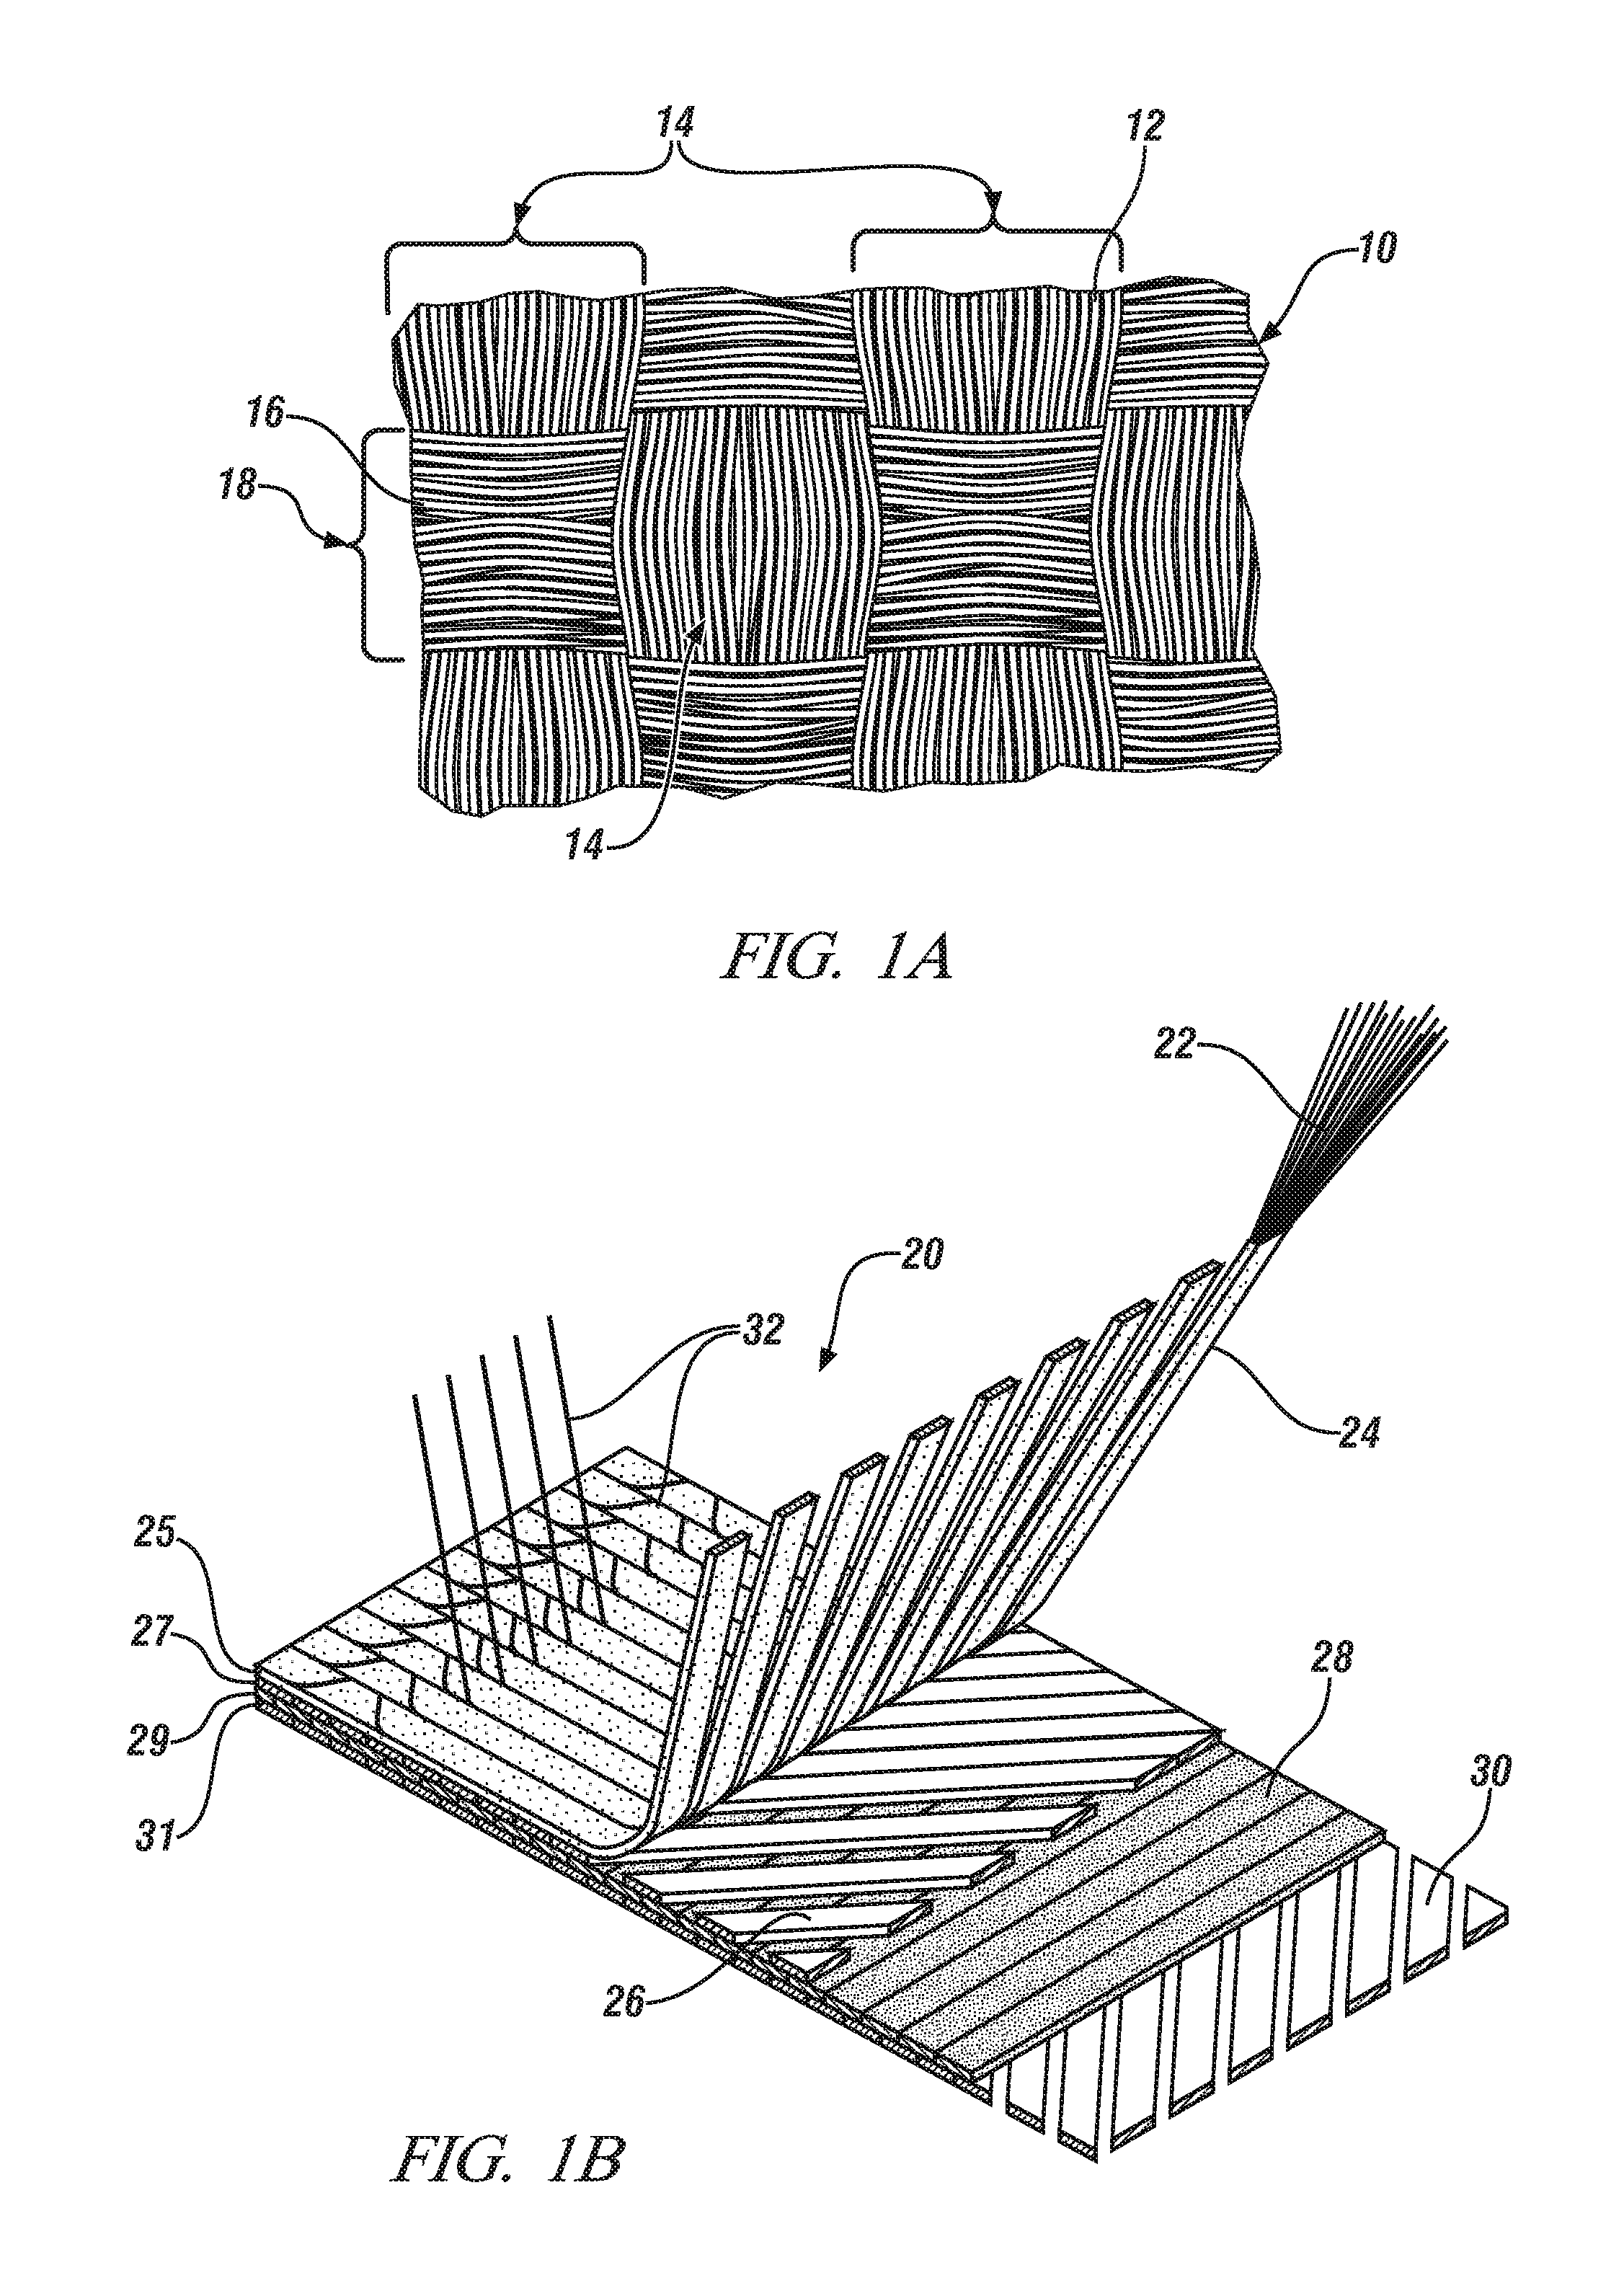 One-piece fiber reinforcement for a reinforced polymer combining aligned and random fiber layers